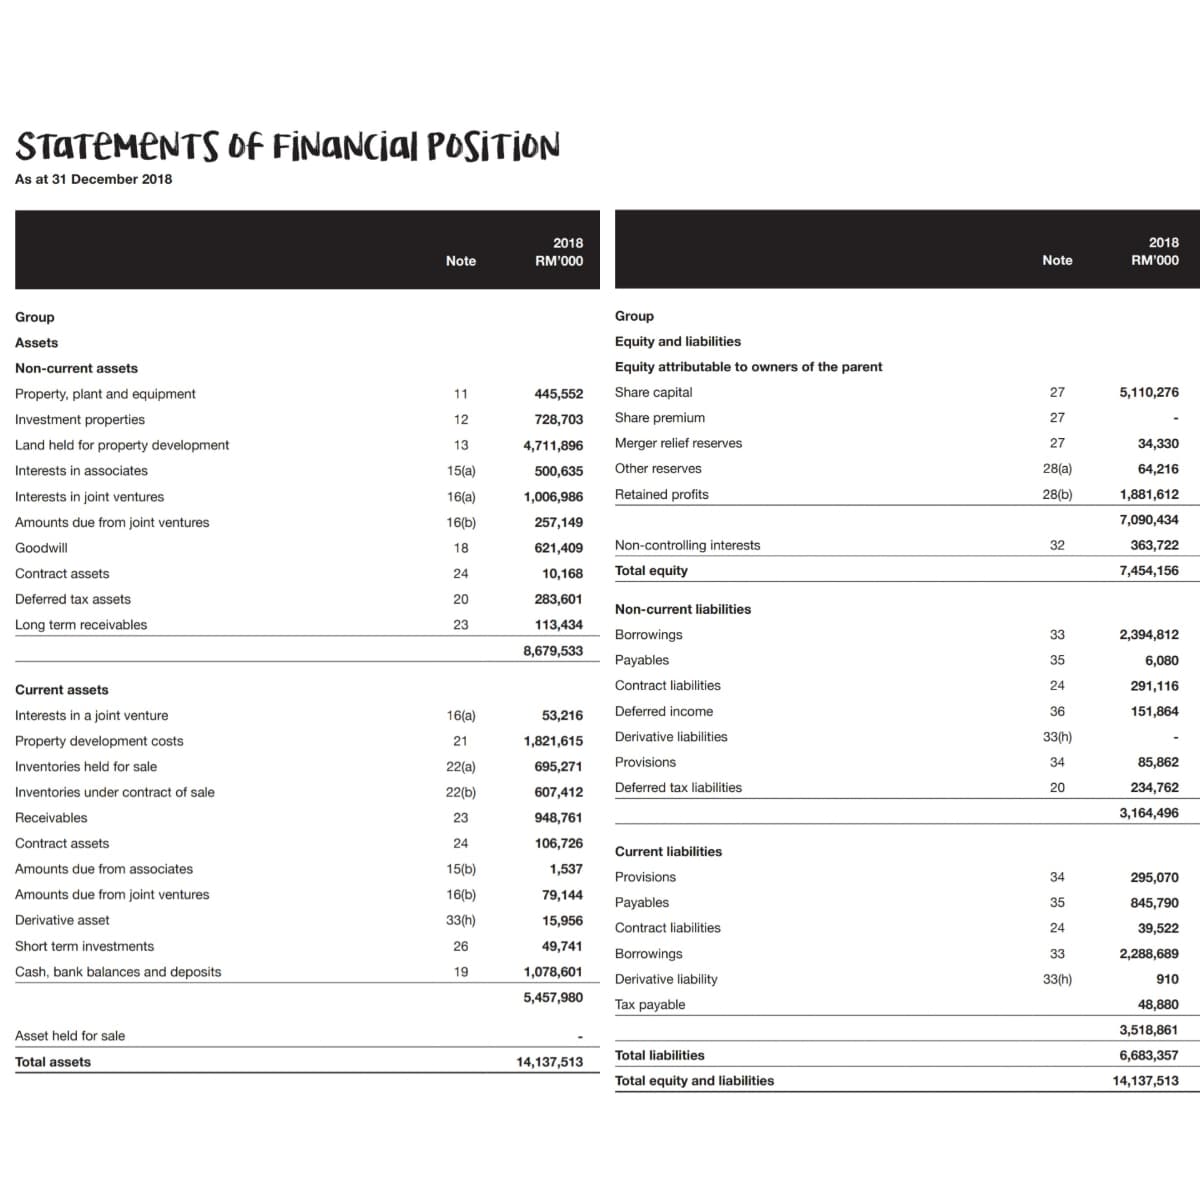 STATEMENTS Of FİNANCjal POSITION
As at 31 December 2018
2018
2018
Note
RM'000
Note
RM'000
Group
Group
Assets
Equity and liabilities
Non-current assets
Equity attributable to owners of the parent
Property, plant and equipment
11
445,552
Share capital
27
5,110,276
Investment properties
12
728,703
Share premium
27
Land held for property development
13
4,711,896
Merger relief reserves
27
34,330
Interests in associates
15(a)
500,635
Other reserves
28(a)
64,216
Interests in joint ventures
16(a)
1,006,986
Retained profits
28(b)
1,881,612
Amounts due from joint ventures
16(b)
257,149
7,090,434
Goodwill
18
621,409
Non-controlling interests
32
363,722
Contract assets
10,168
Total equity
7,454,156
24
Deferred tax assets
20
283,601
Non-current liabilities
Long term receivables
23
113,434
Borrowings
33
2,394,812
8,679,533
Payables
35
6,080
Current assets
Contract liabilities
24
291,116
Interests in a joint venture
16(a)
53,216
Deferred income
36
151,864
Property development costs
21
1,821,615
Derivative liabilities
33(h)
Inventories held for sale
22(a)
695,271
Provisions
34
85,862
Deferred tax liabilities
20
234,762
Inventories under contract of sale
22(b)
607,412
Receivables
23
948,761
3,164,496
Contract assets
24
106,726
Current liabilities
Amounts due from associates
15(b)
1,537
Provisions
34
295,070
Amounts due from joint ventures
16(b)
79,144
Payables
35
845,790
Derivative asset
33(h)
15,956
Contract liabilities
24
39,522
Short term investments
26
49,741
Borrowings
33
2,288,689
Cash, bank balances and deposits
19
1,078,601
Derivative liability
33(h)
910
5,457,980
Tax payable
48,880
Asset held for sale
3,518,861
Total assets
14,137,513
Total liabilities
6,683,357
Total equity and liabilities
14,137,513
